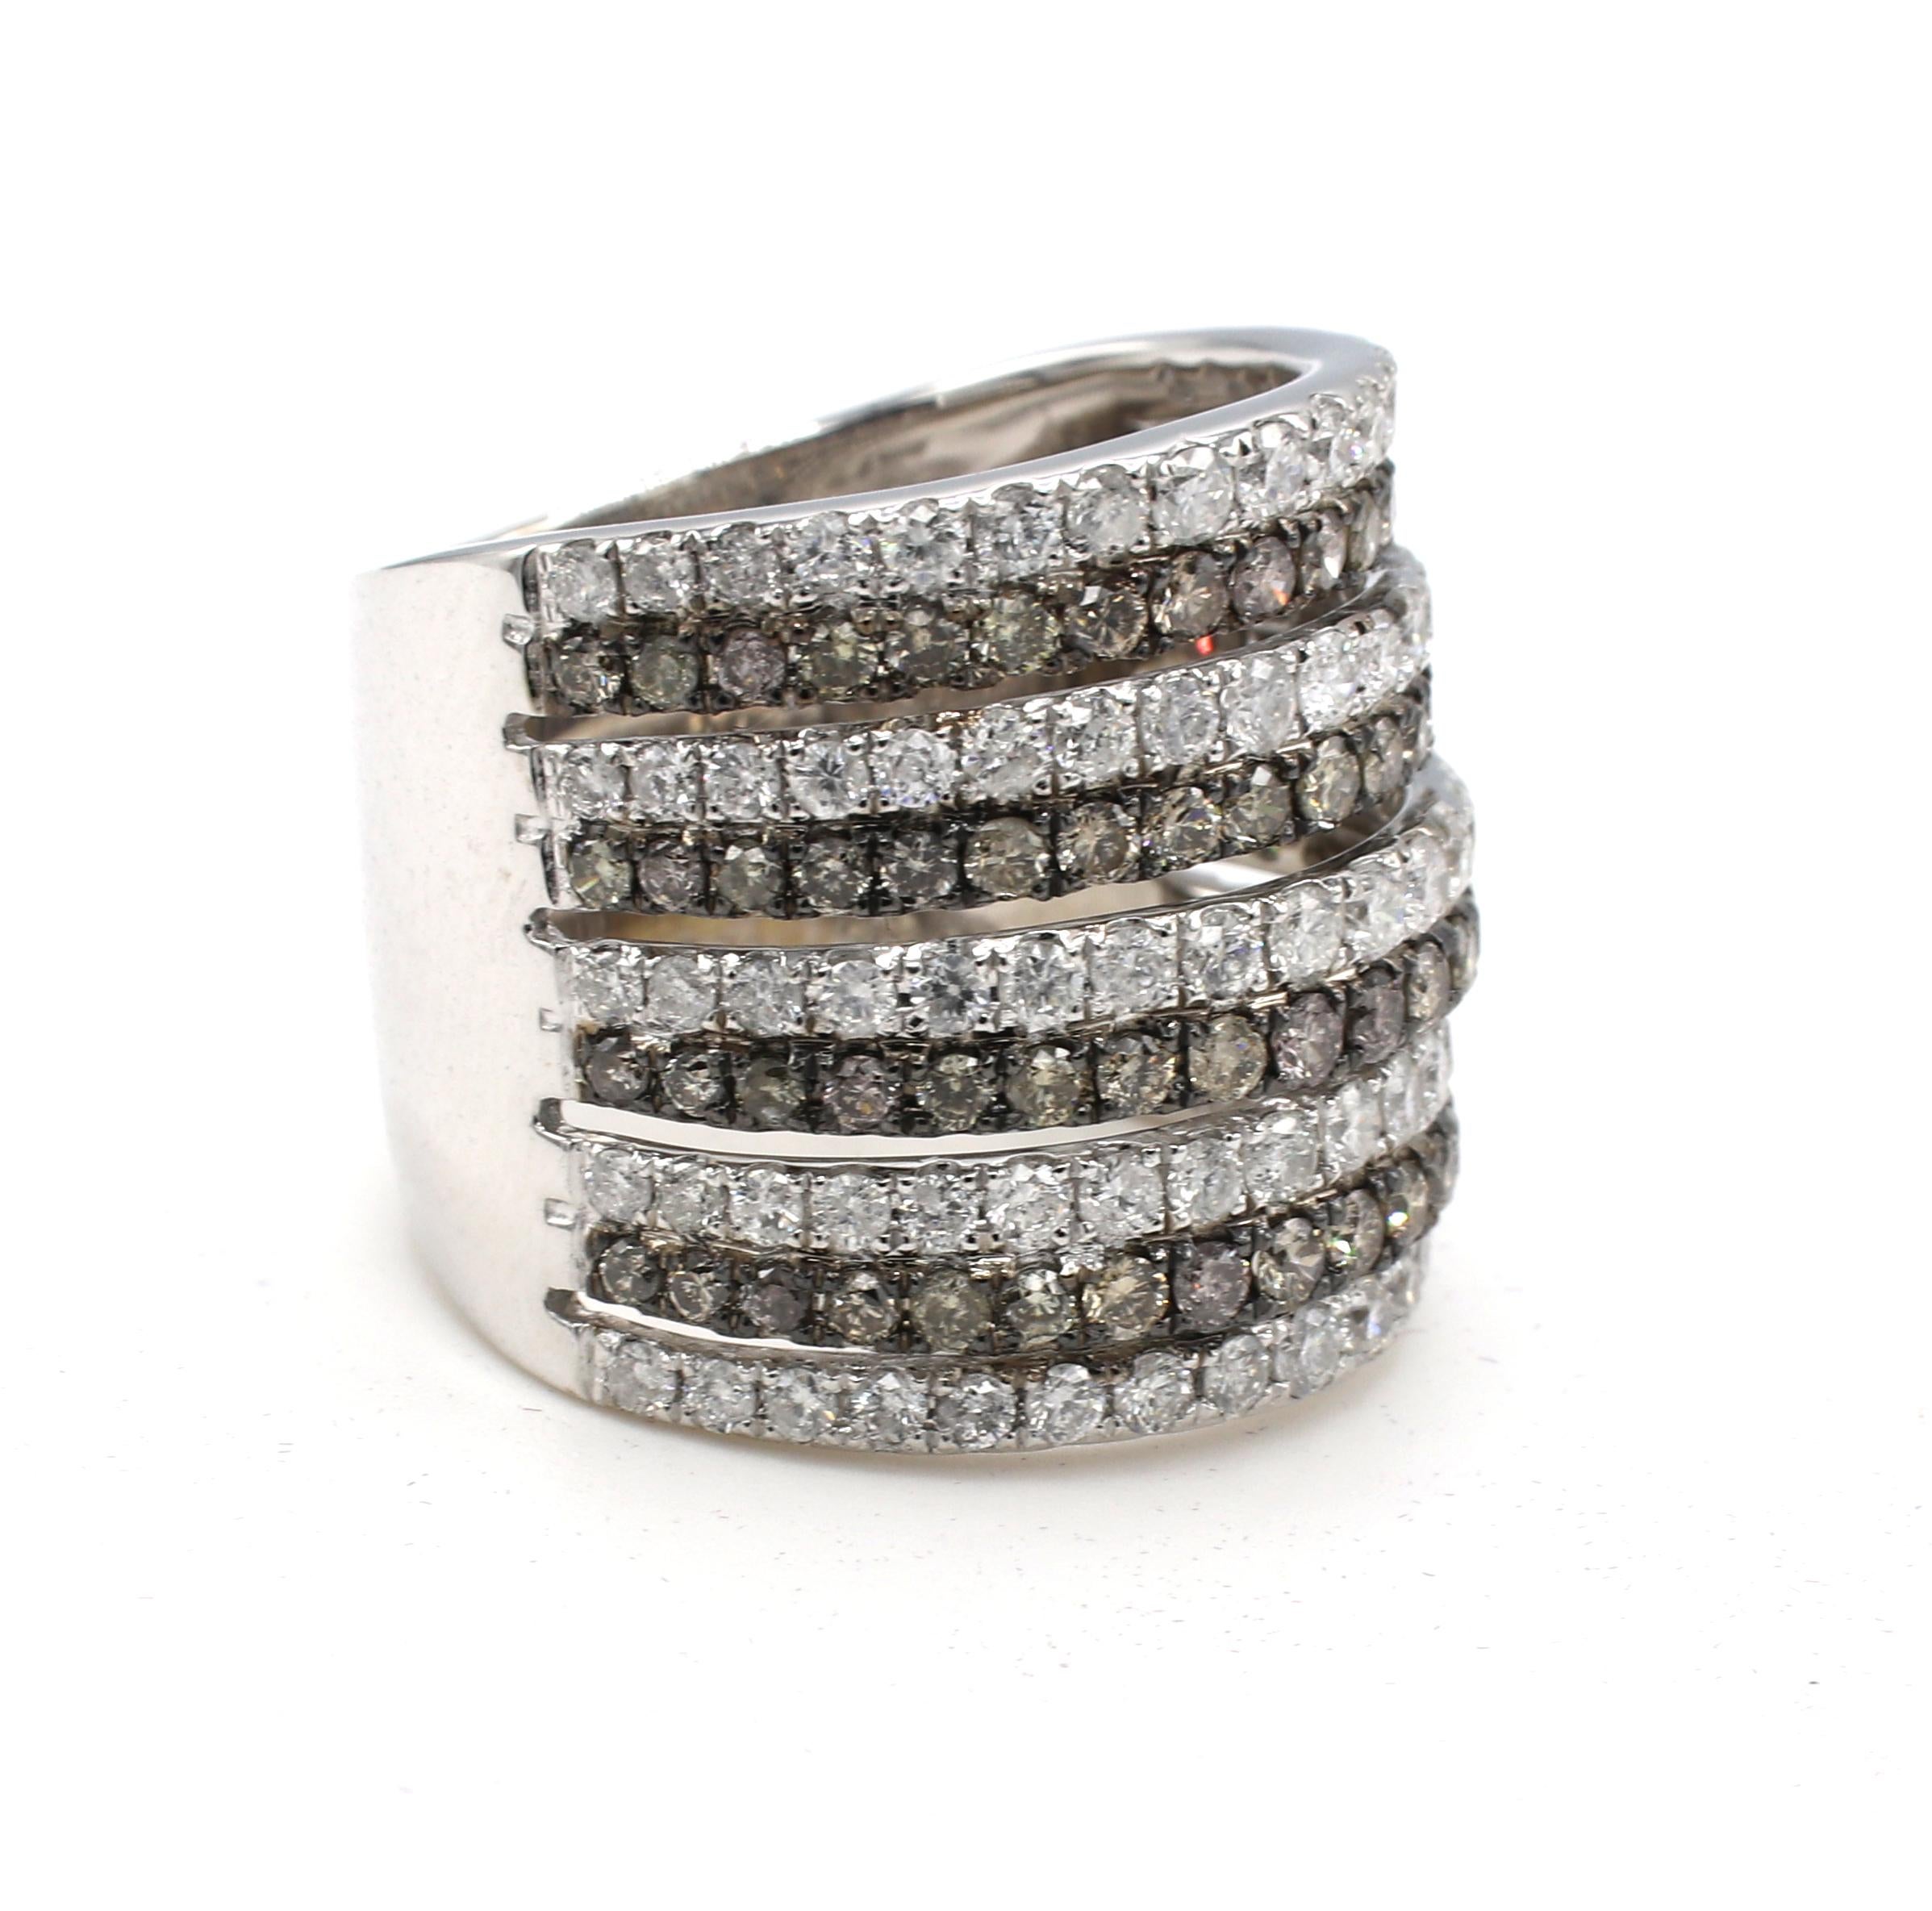 18 Karat White Gold 2.70 Carat White & Brown Dimond Wide Cocktail Band Ring 
Metal: 18k white gold
Weight: 11.78 grams
Diamonds: 2.70 CTW colorless & brown SI round diamonds 
Width: 19.3 - 10.8mm
Size: 7.25 (US)
Signed: D2.70 18K 750 
